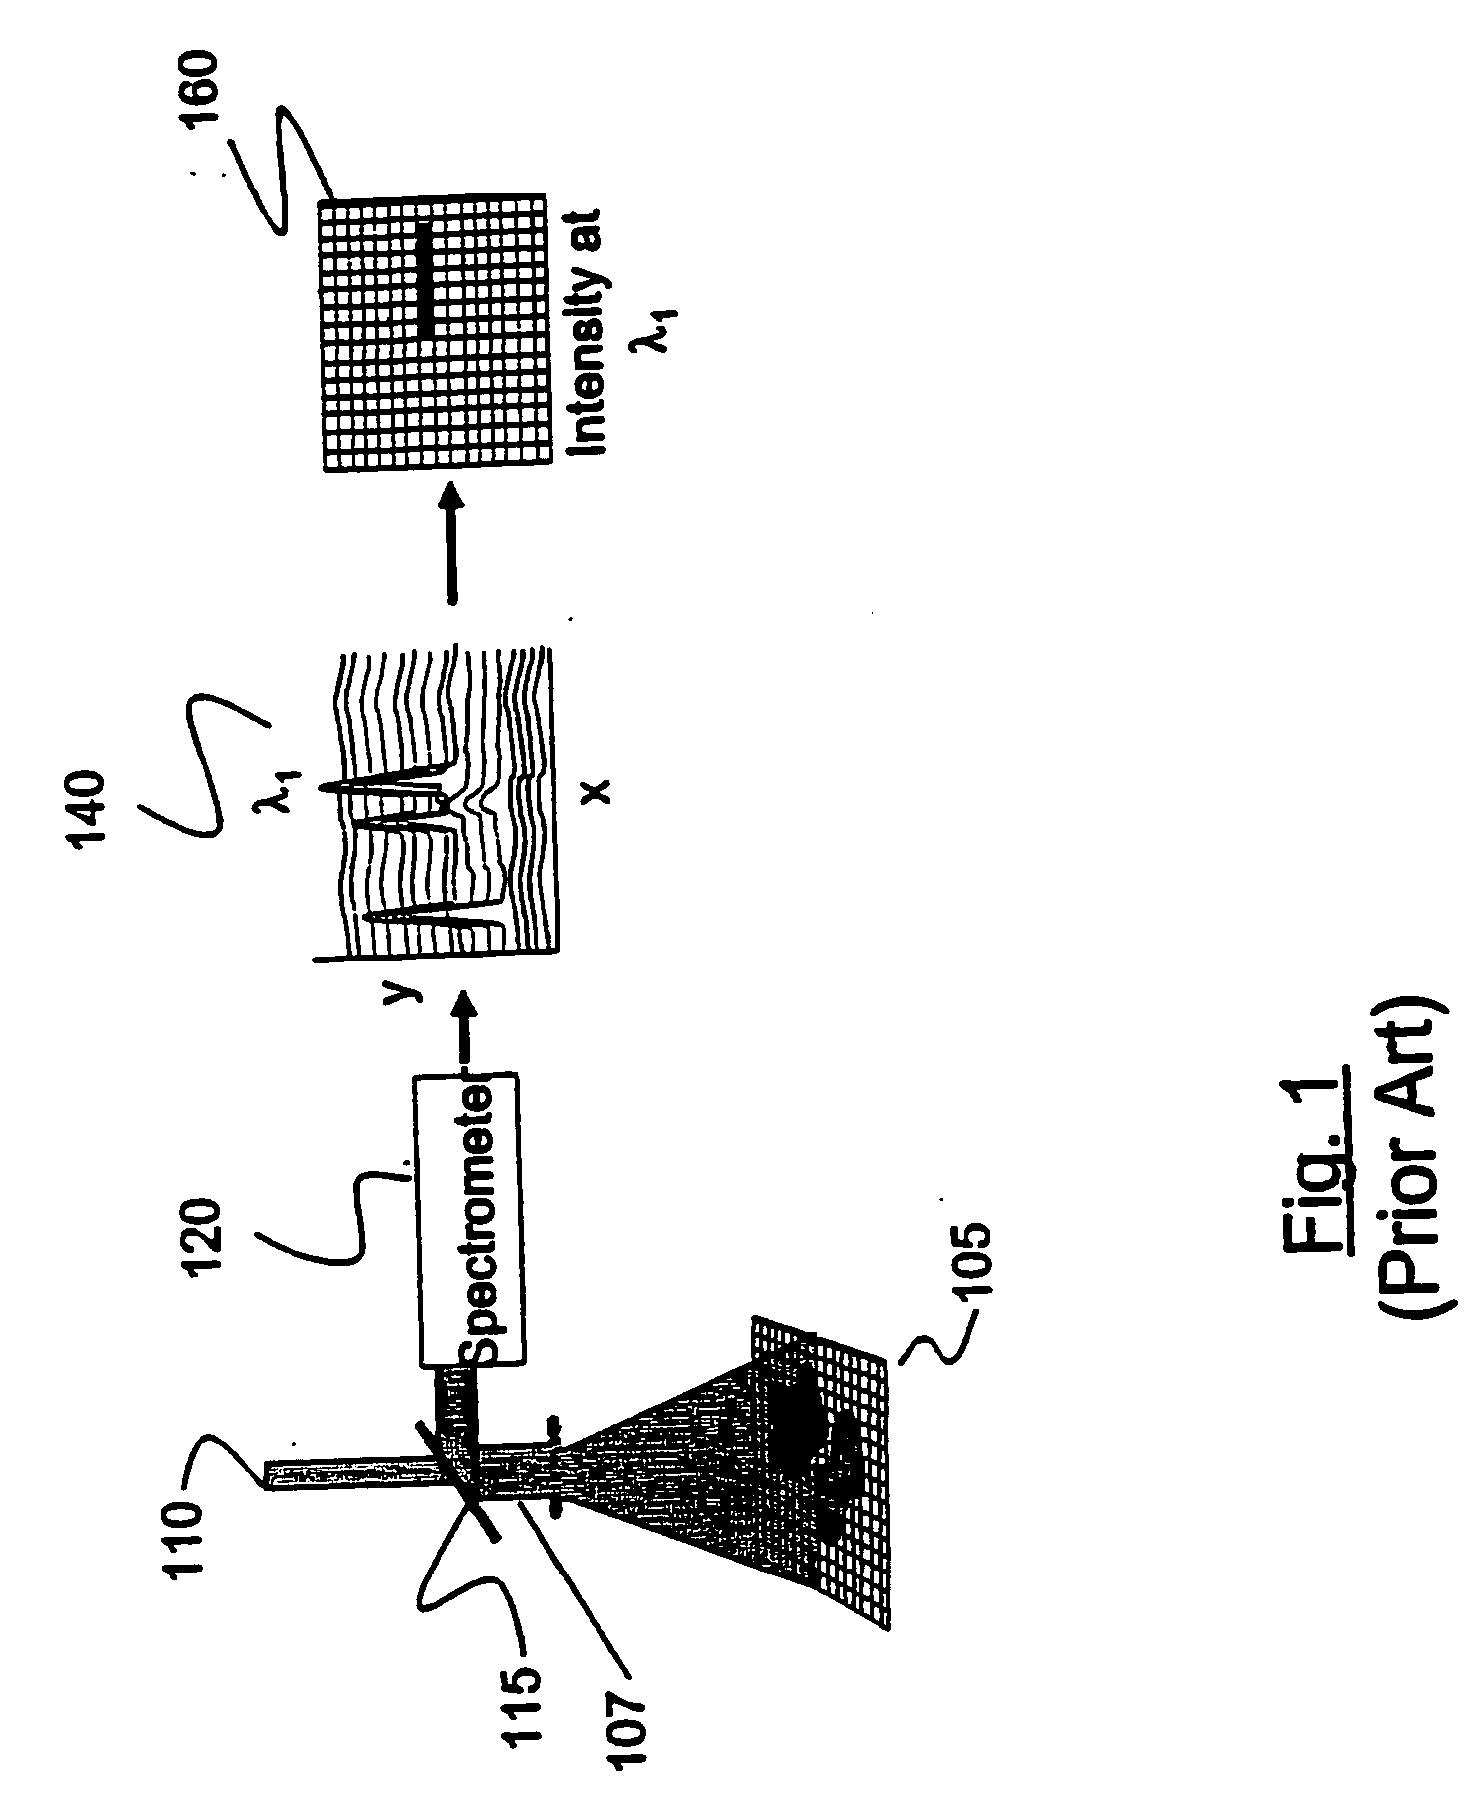 System and method for a chemical imaging threat assessor with a probe